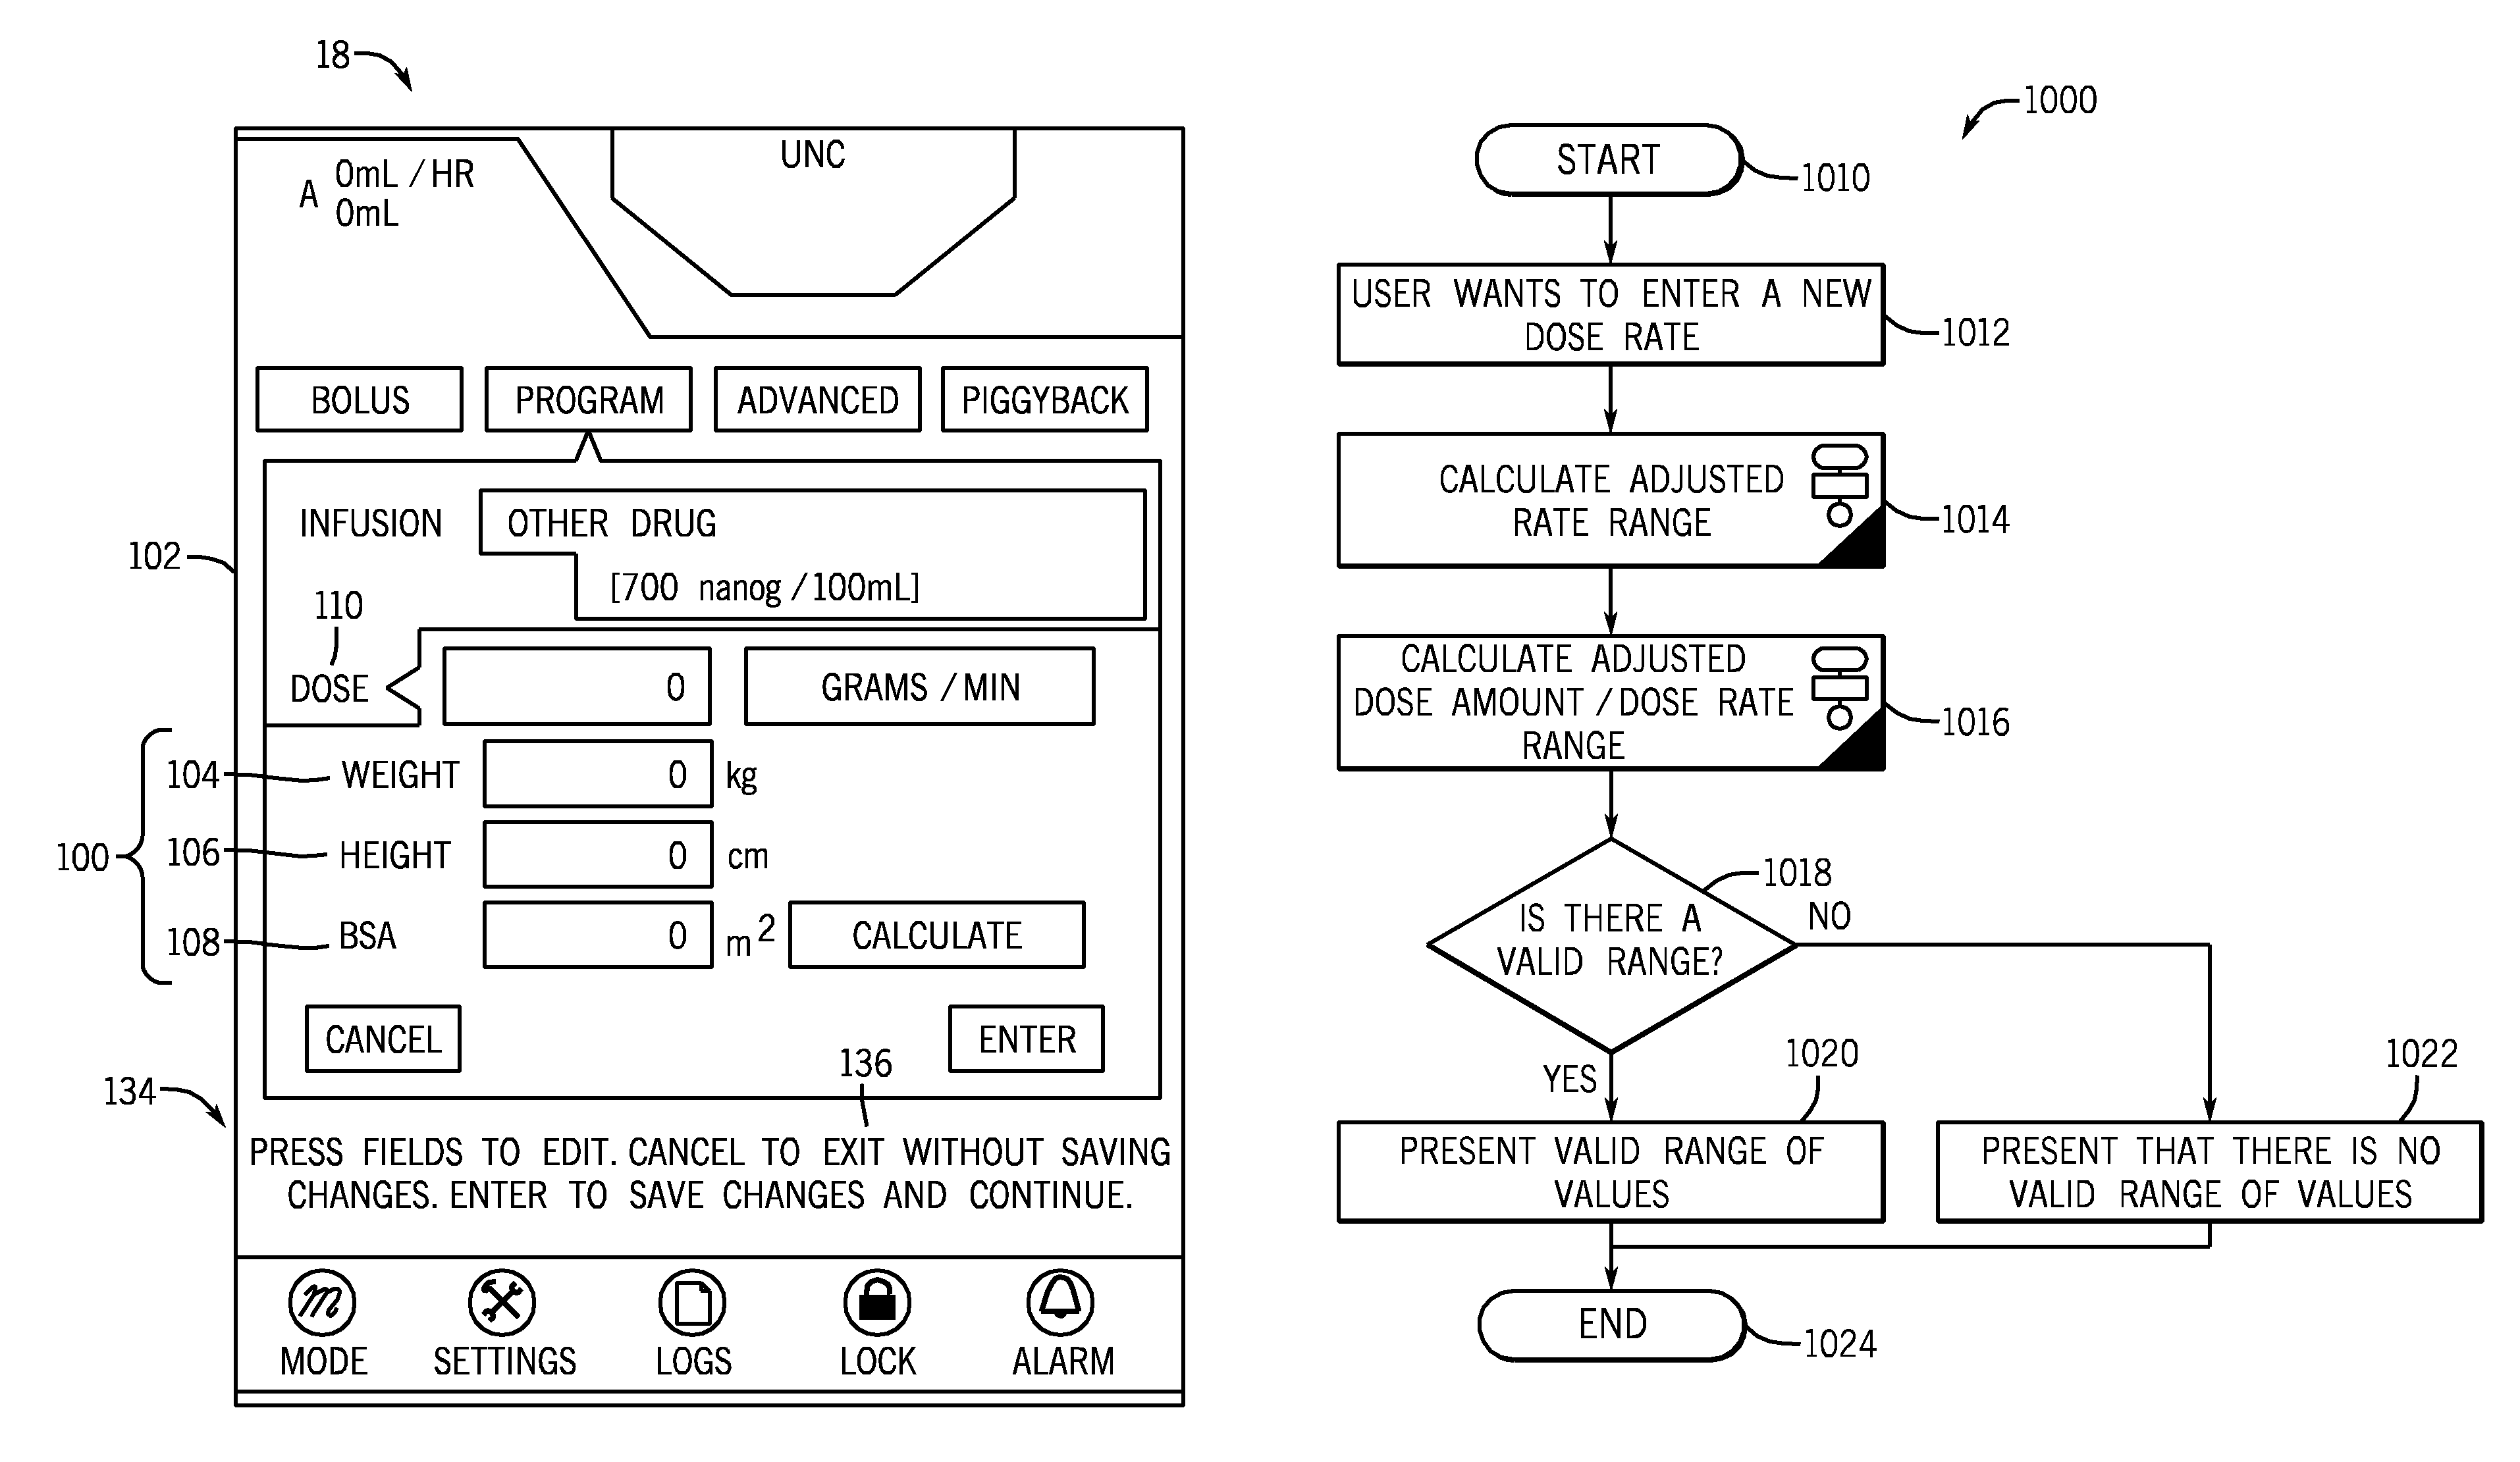 System for guiding a user during programming of a medical device